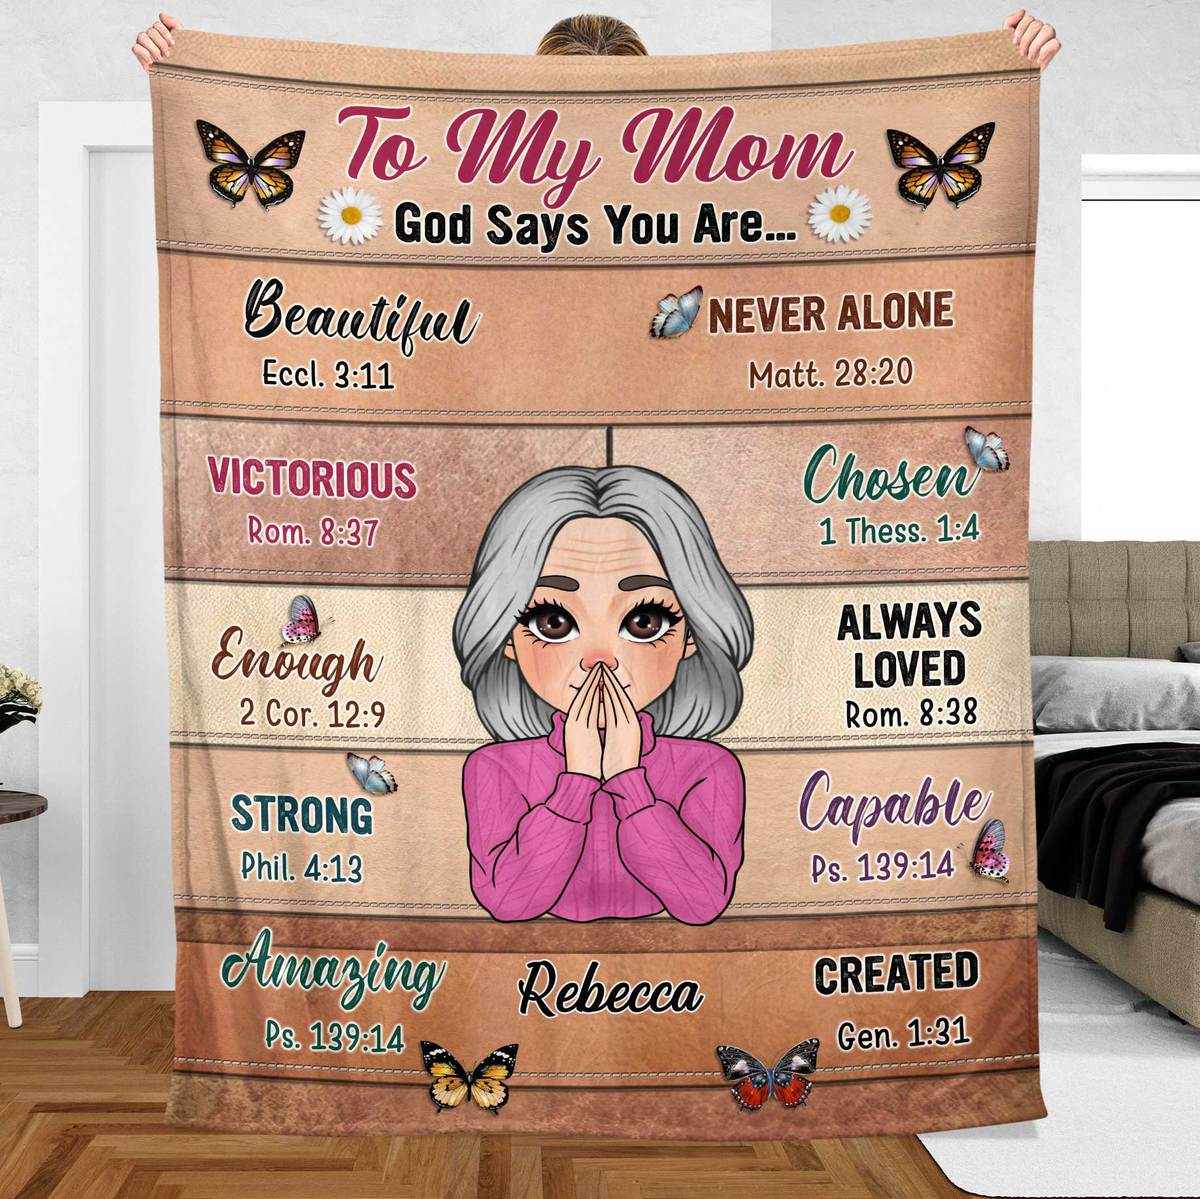 To My Mom - God Says You Are - Personalized Blanket - Best Gift For Mother, Grandma